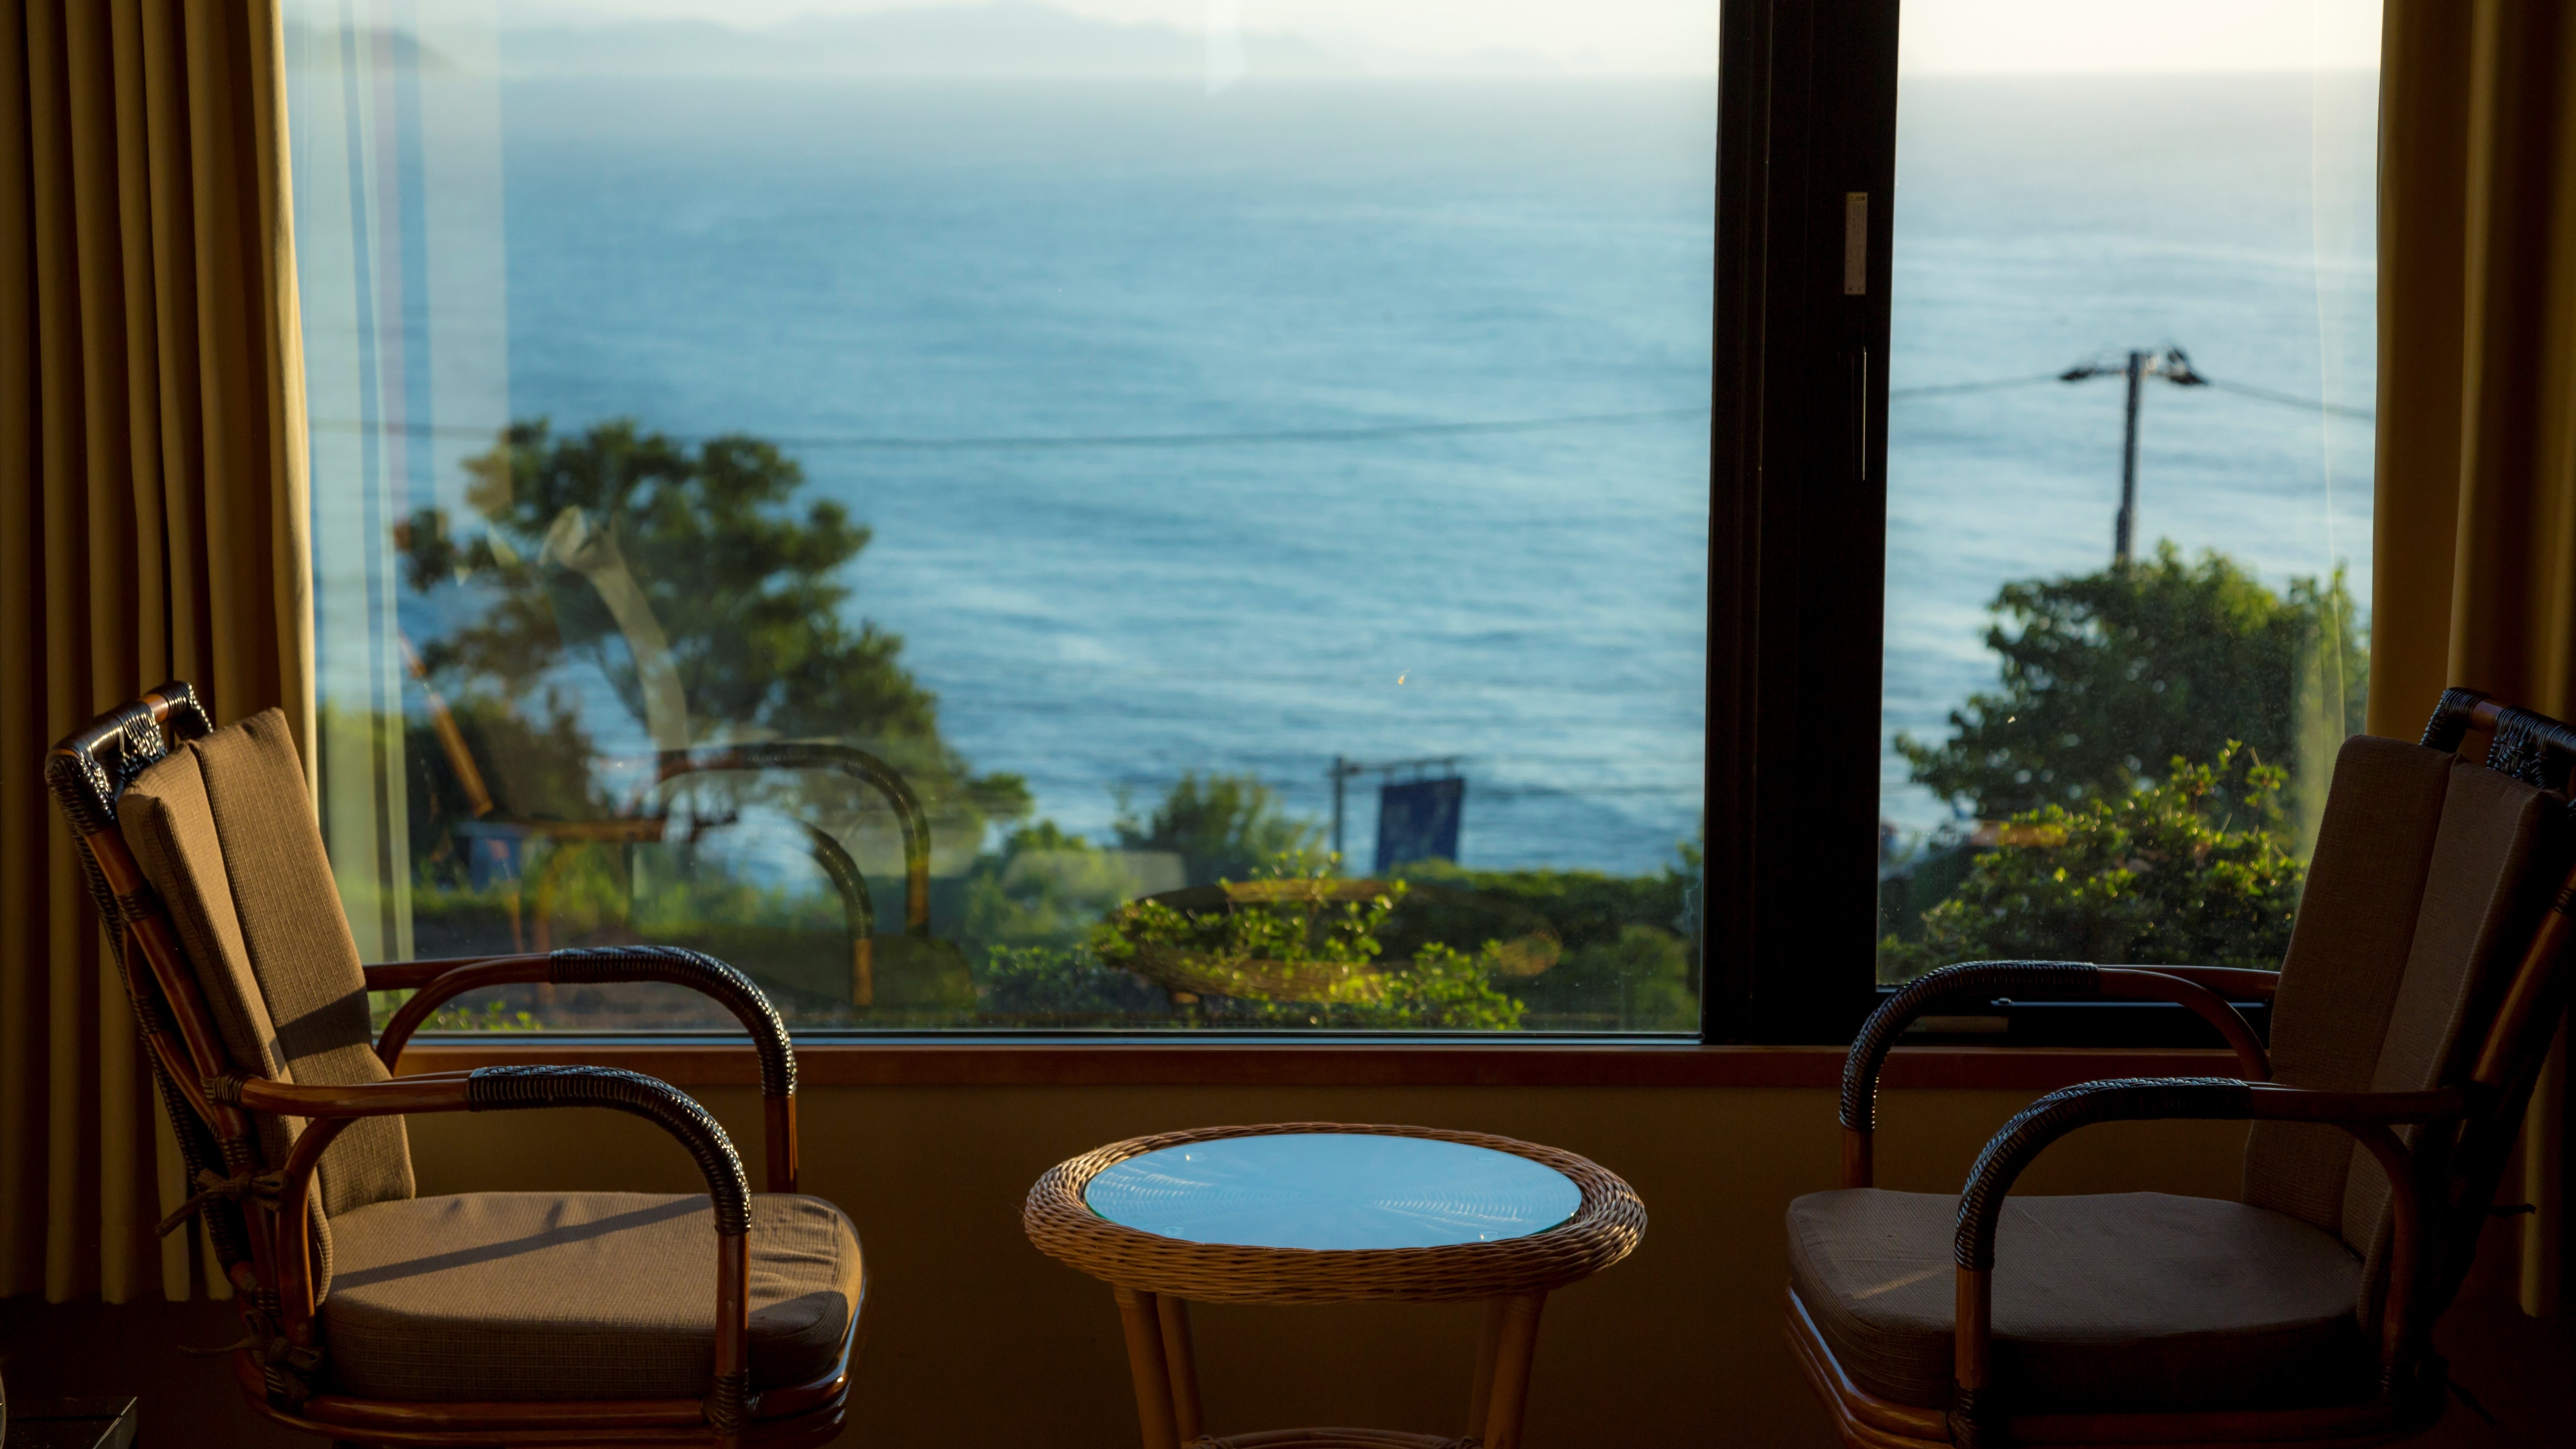 [View from the guest room] The ocean view guest room overlooks the beautiful sea.